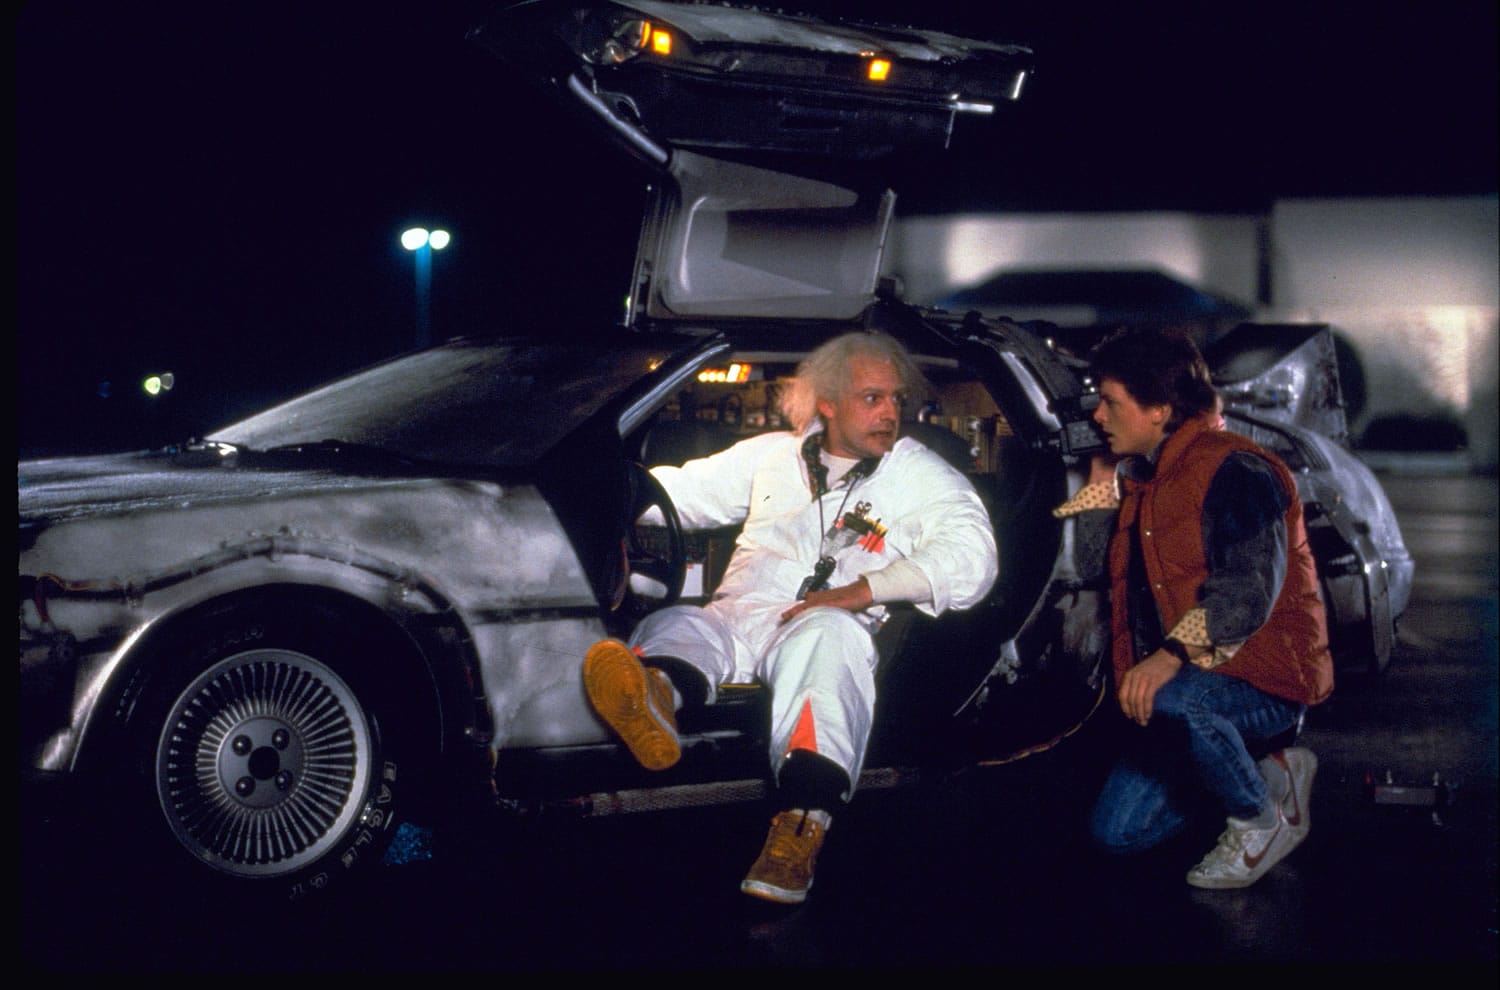 Christopher Lloyd, left, as Doc Brown, and Michael J. Fox as Marty McFly in the 1985 film, &quot;Back to the Future.&quot; Wednesday&#039;s so-called &quot;Back to the Future&quot; Day marks the date -- Oct. 21, 2015 -- that characters McFly, Brown and Jennifer Parker famously journeyed to the future in the film trilogy&#039;s second installment in 1989.